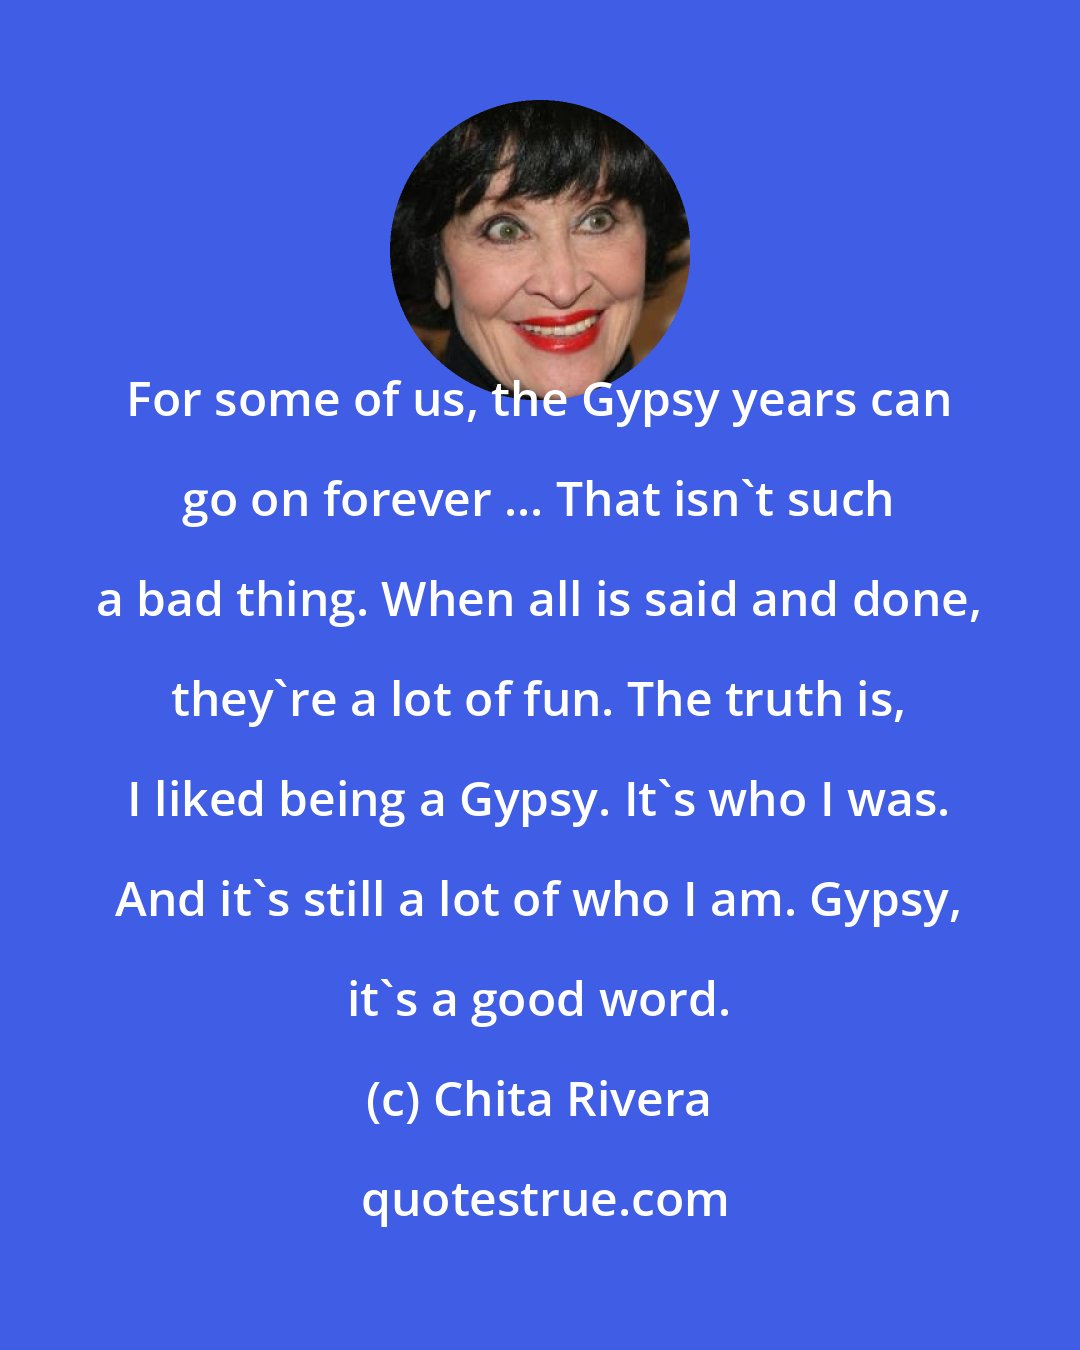 Chita Rivera: For some of us, the Gypsy years can go on forever ... That isn't such a bad thing. When all is said and done, they're a lot of fun. The truth is, I liked being a Gypsy. It's who I was. And it's still a lot of who I am. Gypsy, it's a good word.